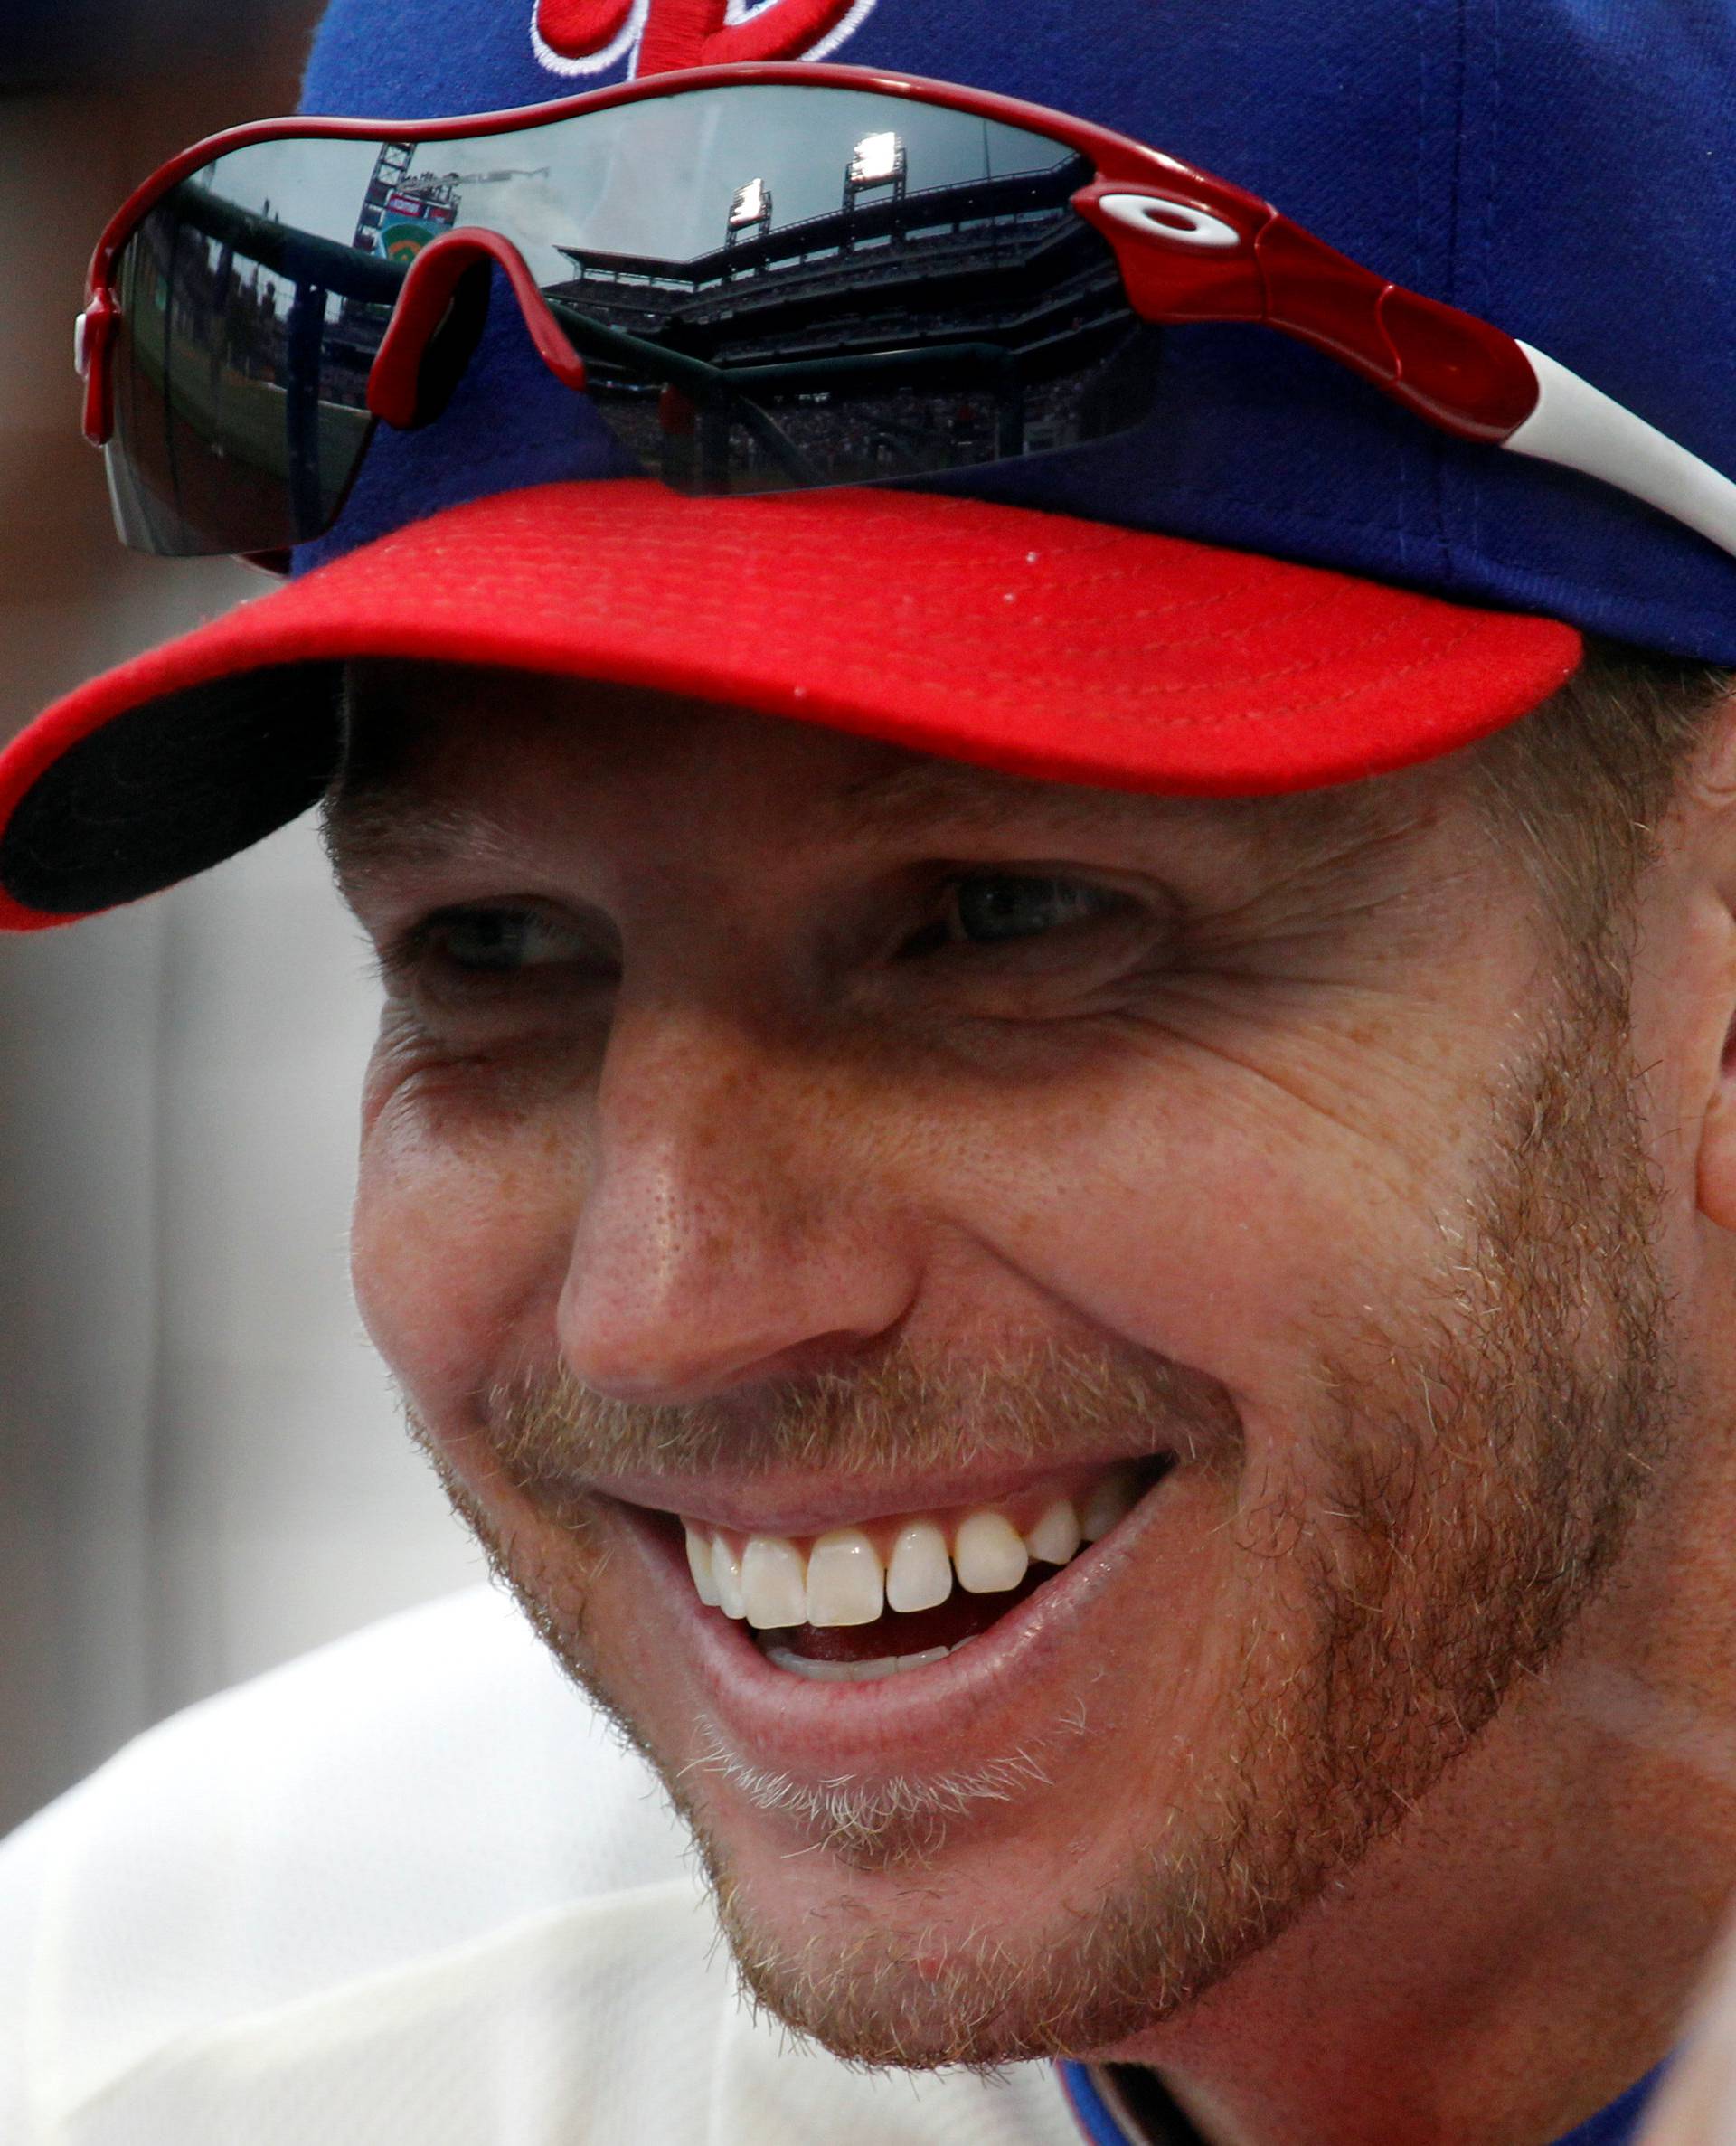 FILE PHOTO: Phillies' Halladay smiles while sitting in the dugout before their MLB National League baseball game against the Cubs in Philadelphia